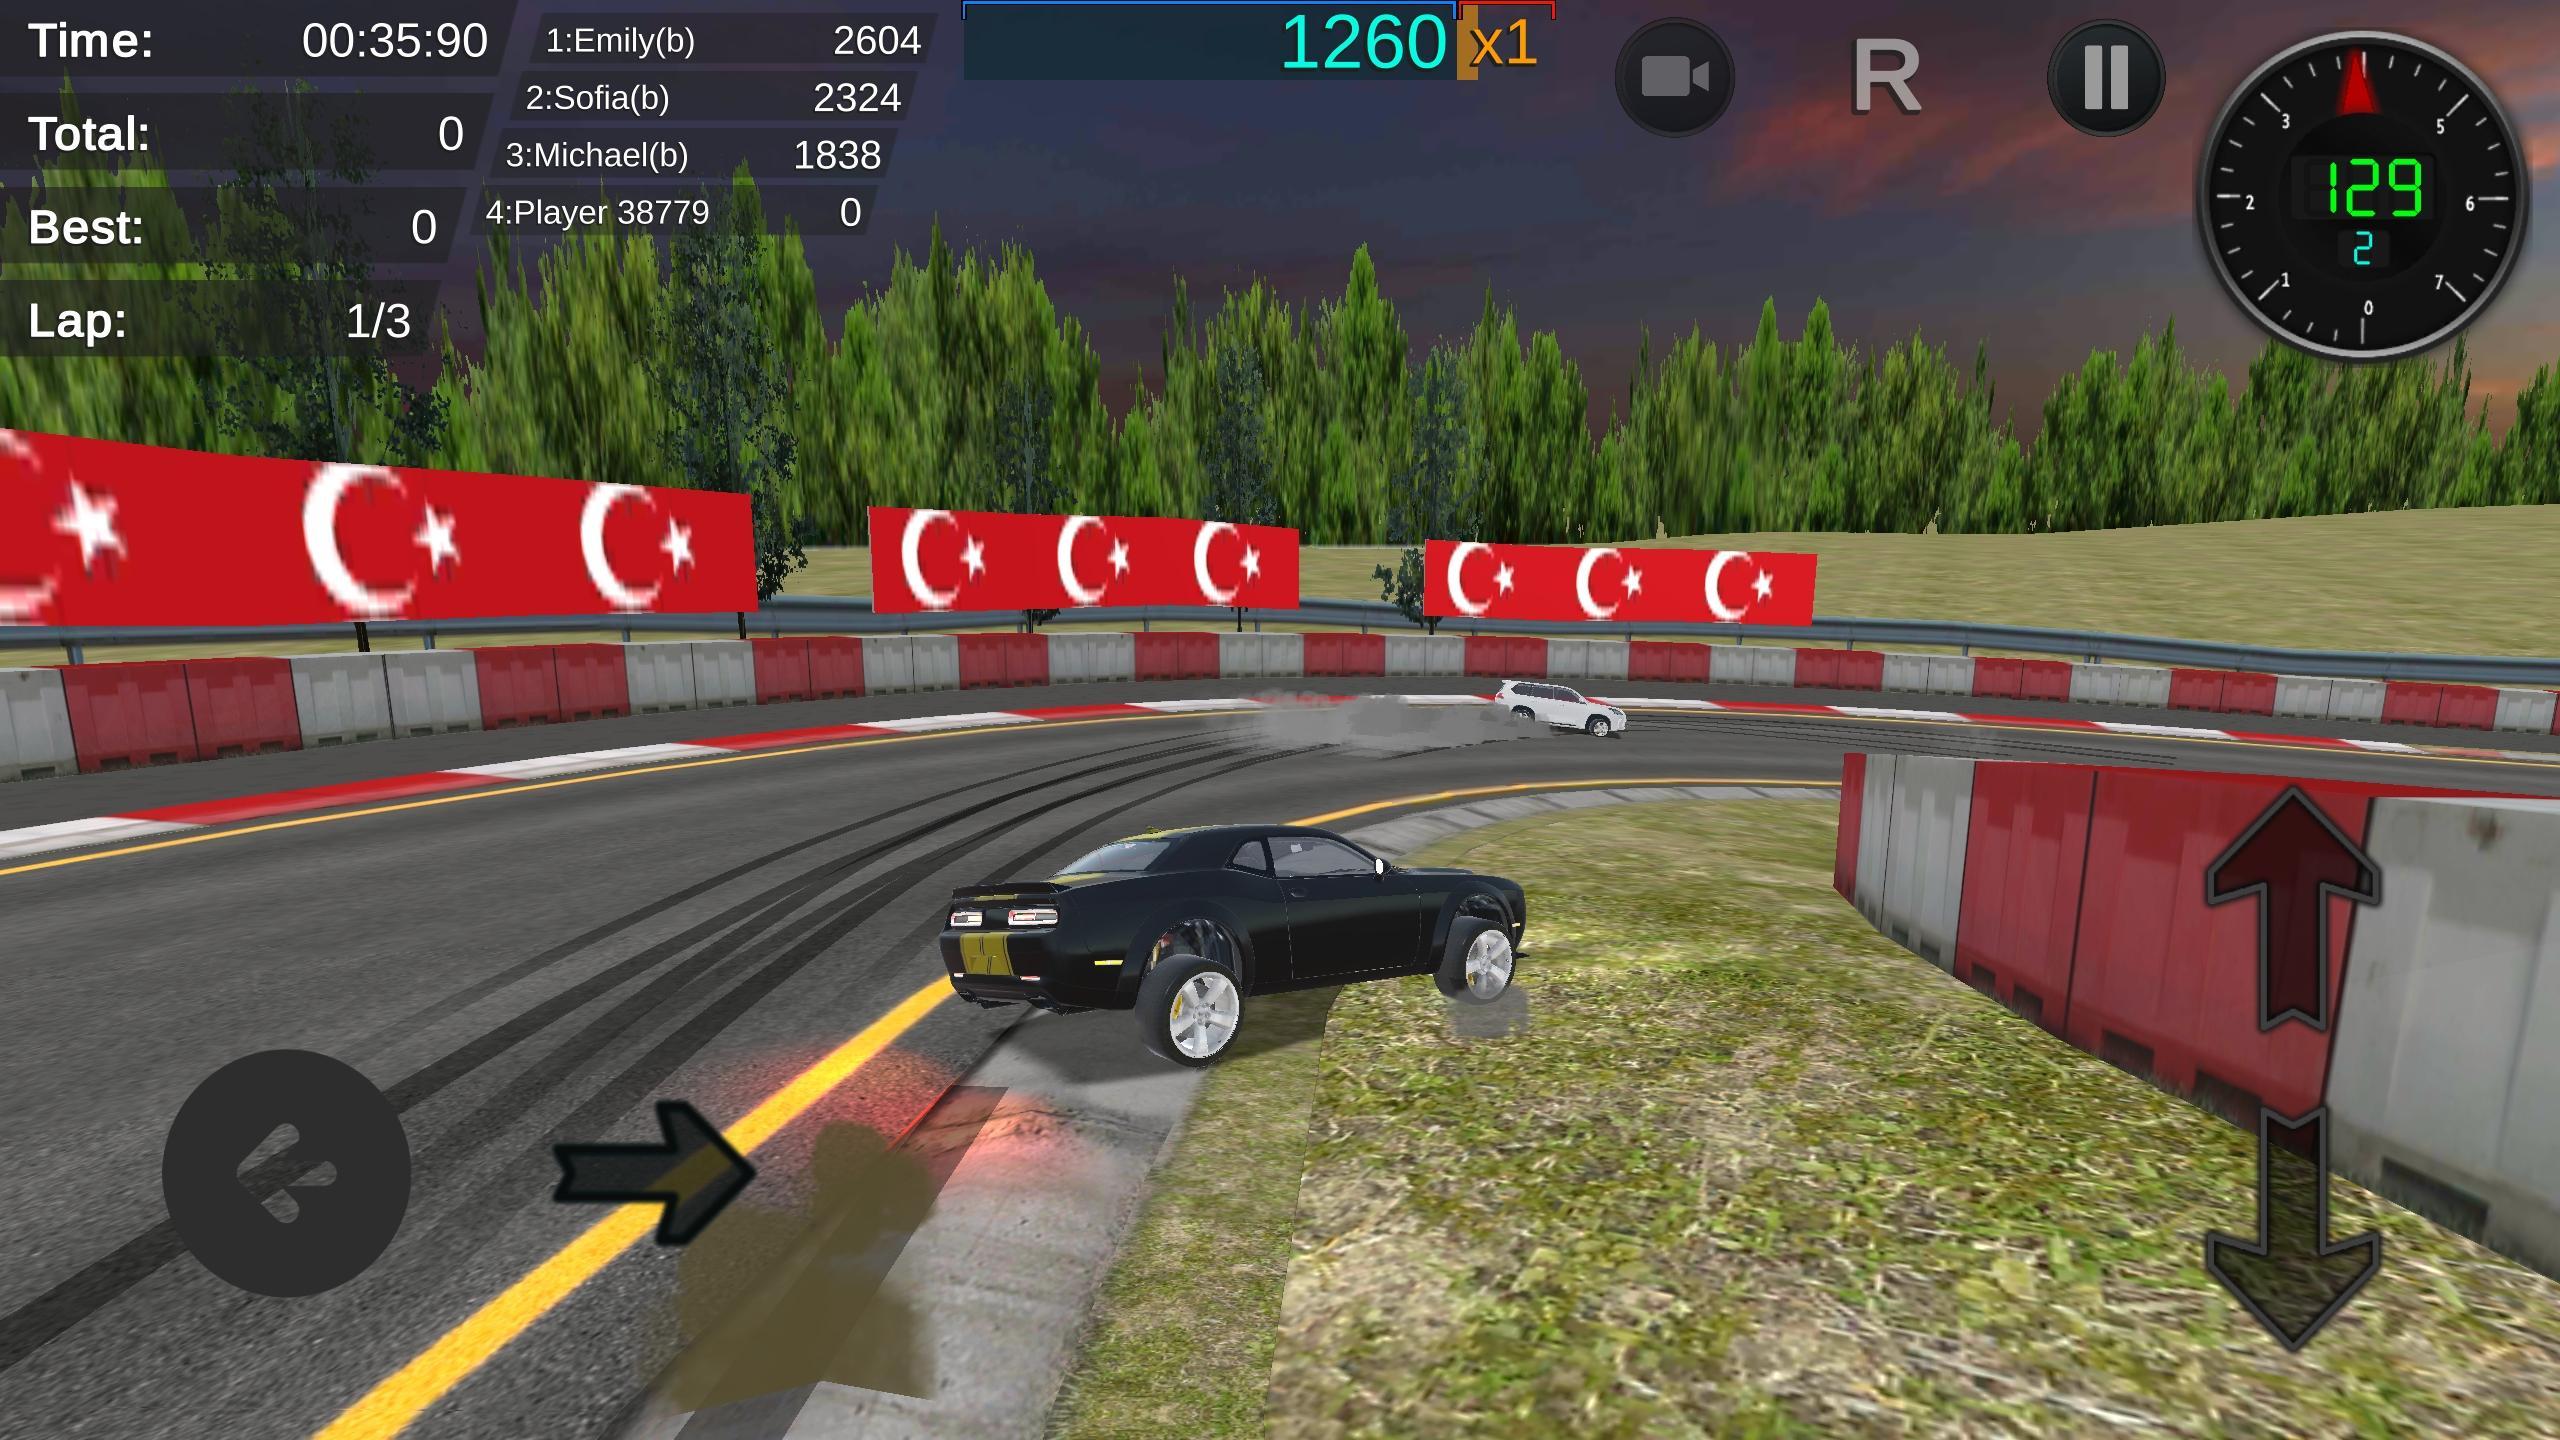 Racing in car multiplayer. Ракинг ин кар мультиплеер 2022 год взломанный. Camry game Android.